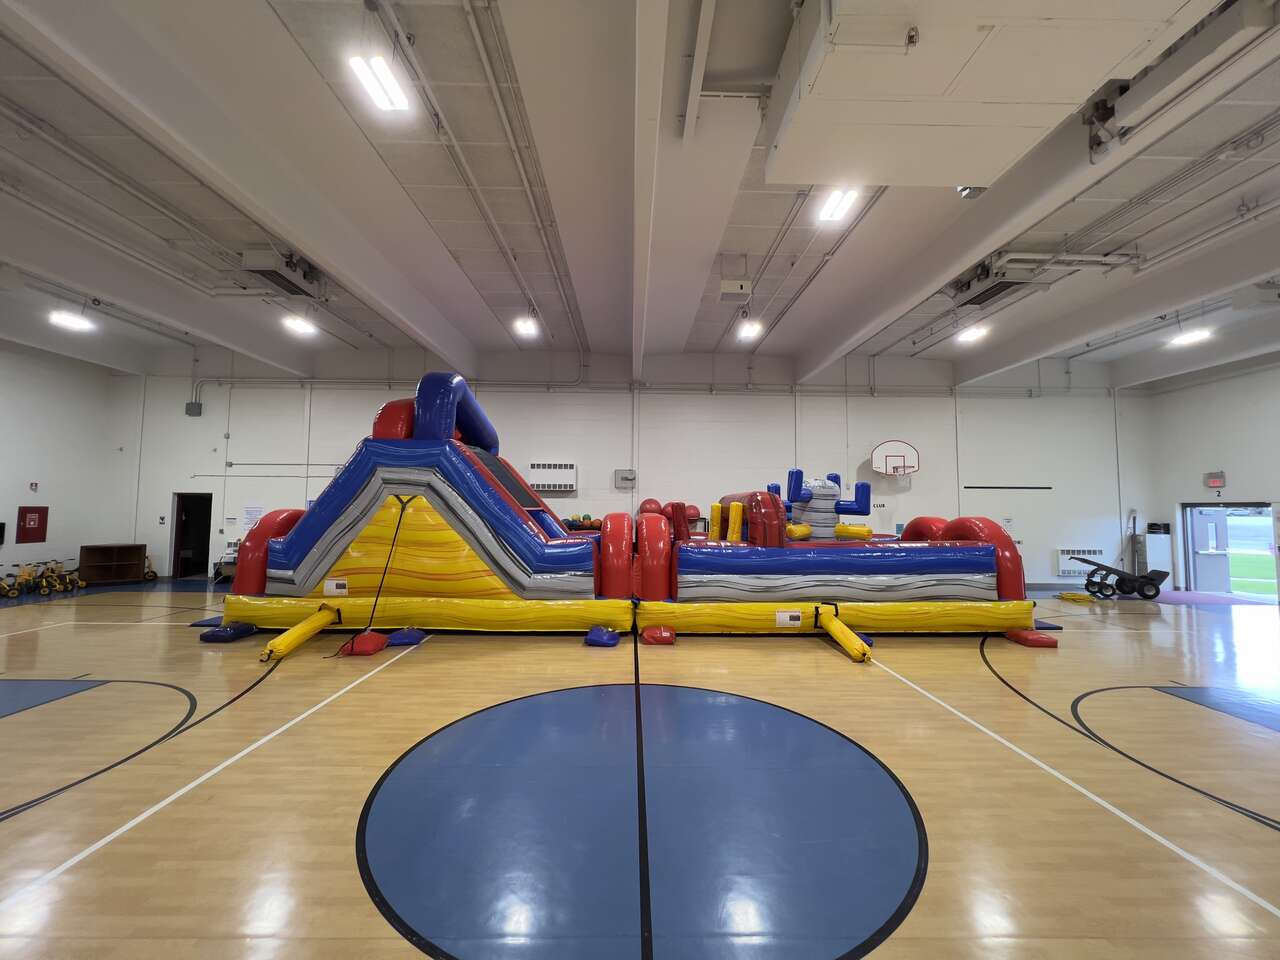 obstacles courses, from Fun Bounces Rental in Sandwich, IL 60548